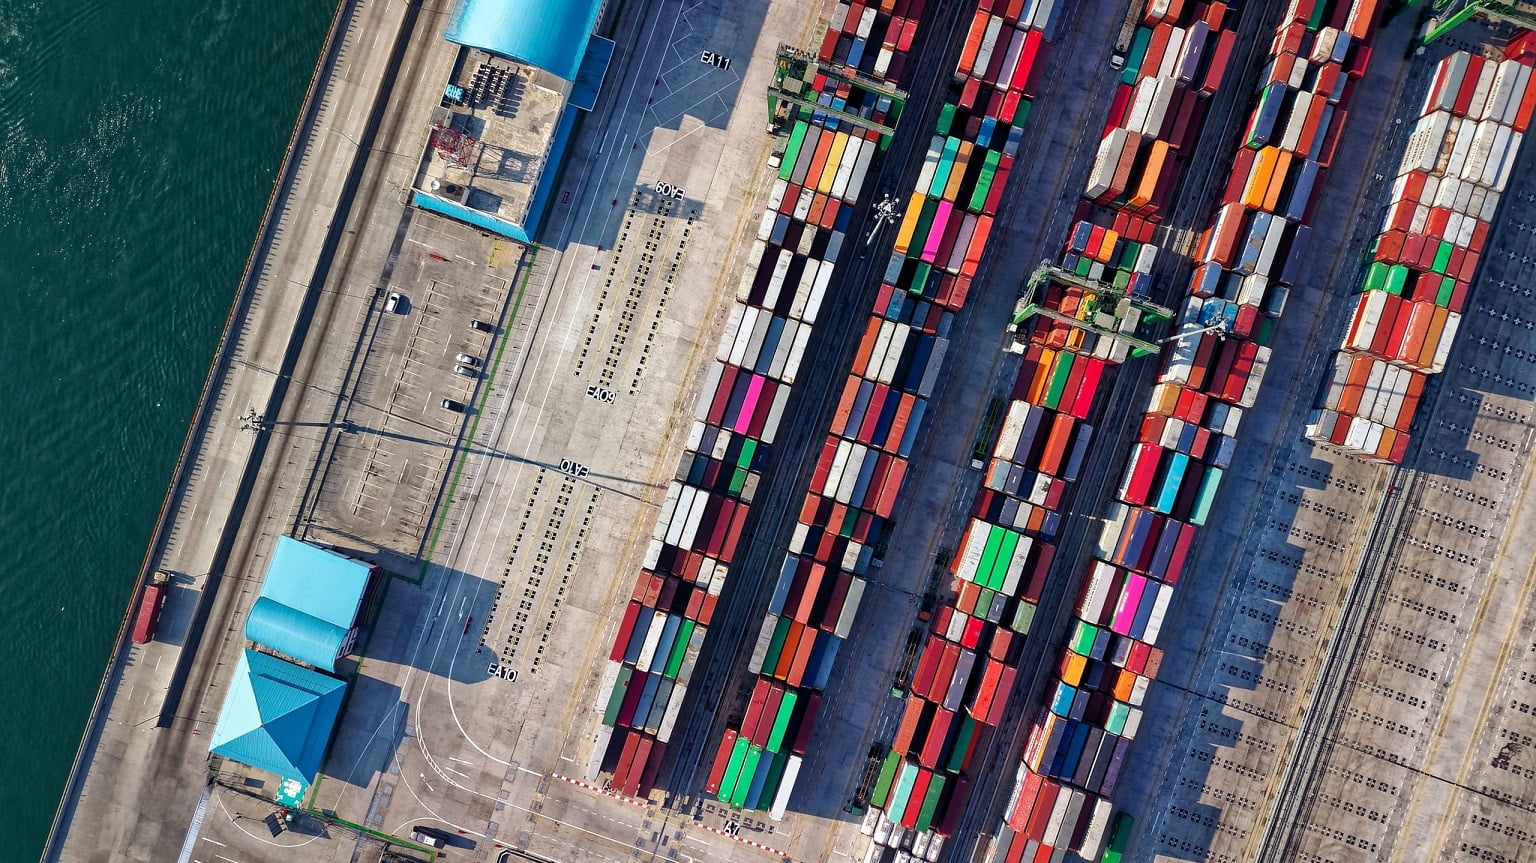 Sharing freight transport data with insurers to enable improved processes and risk management